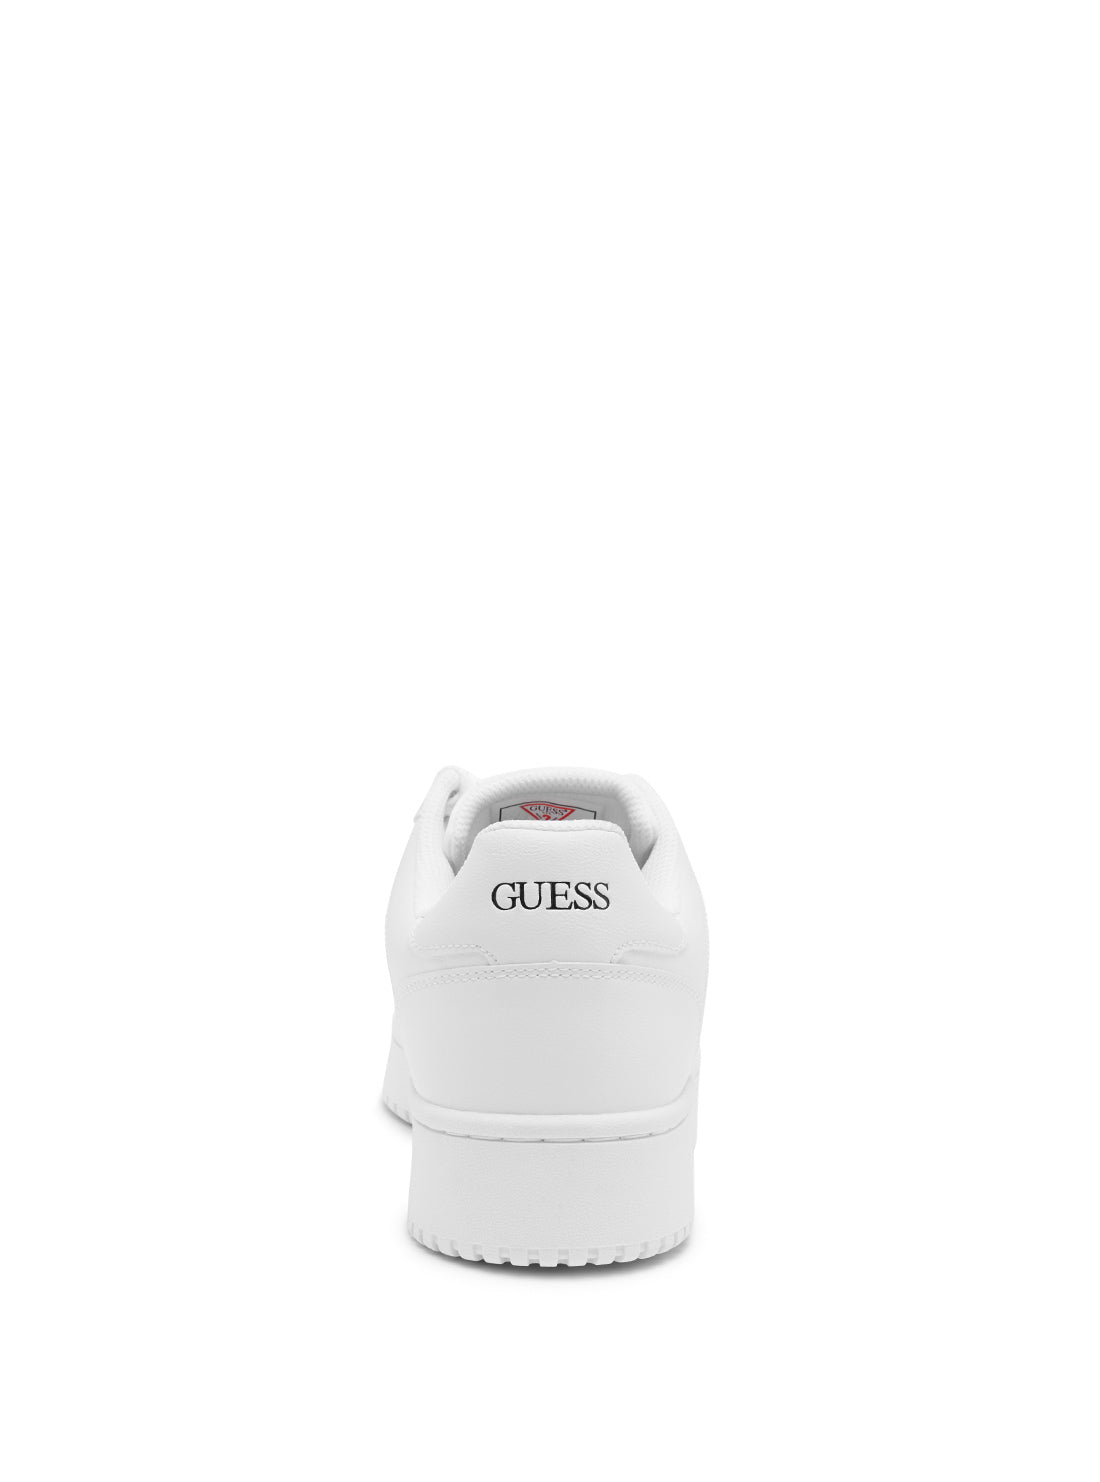 GUESS White Aveni Low-Top Sneakers back view